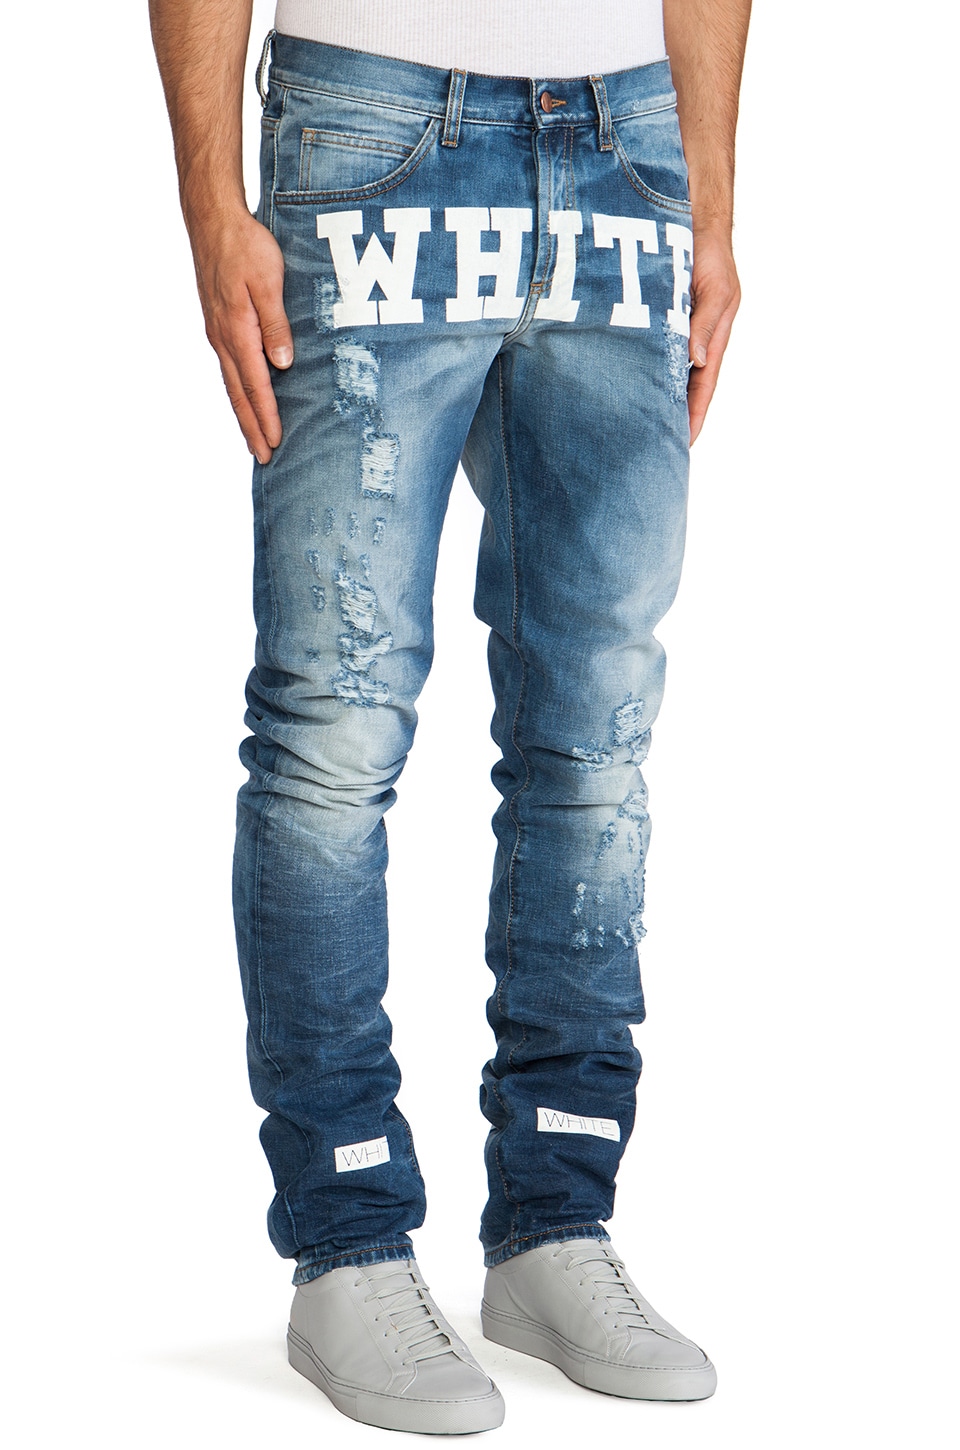 OFF-WHITE Jean with White Text in Vintage Wash | REVOLVE